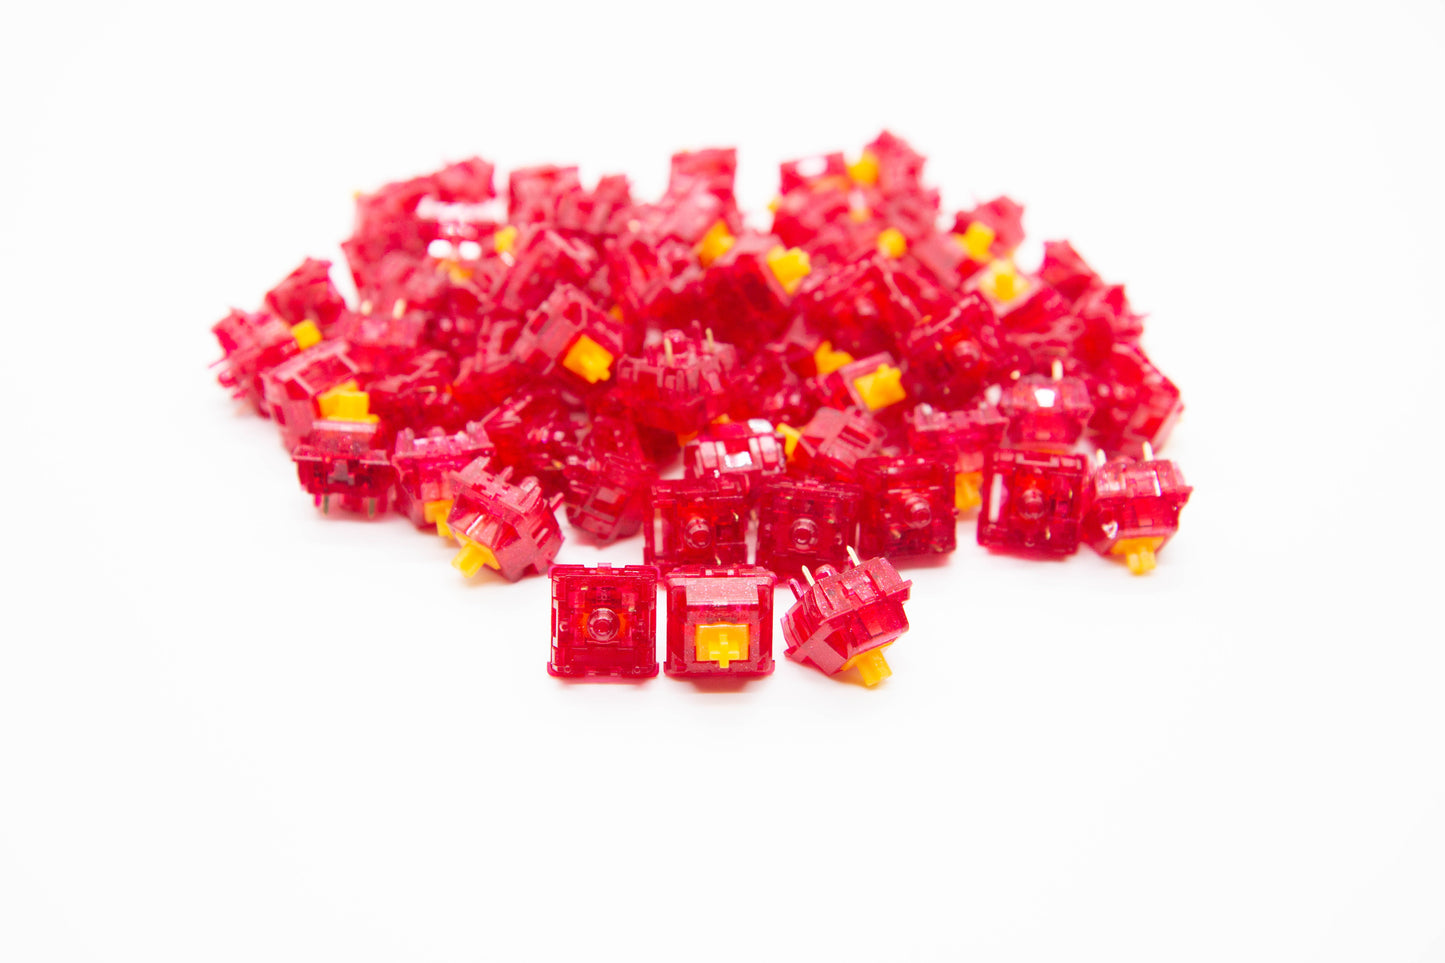 Close-up shot of a pile of Tecsee Ruby V2 mechanical keyboard switches featuring bright red transparent housing and yellow stems